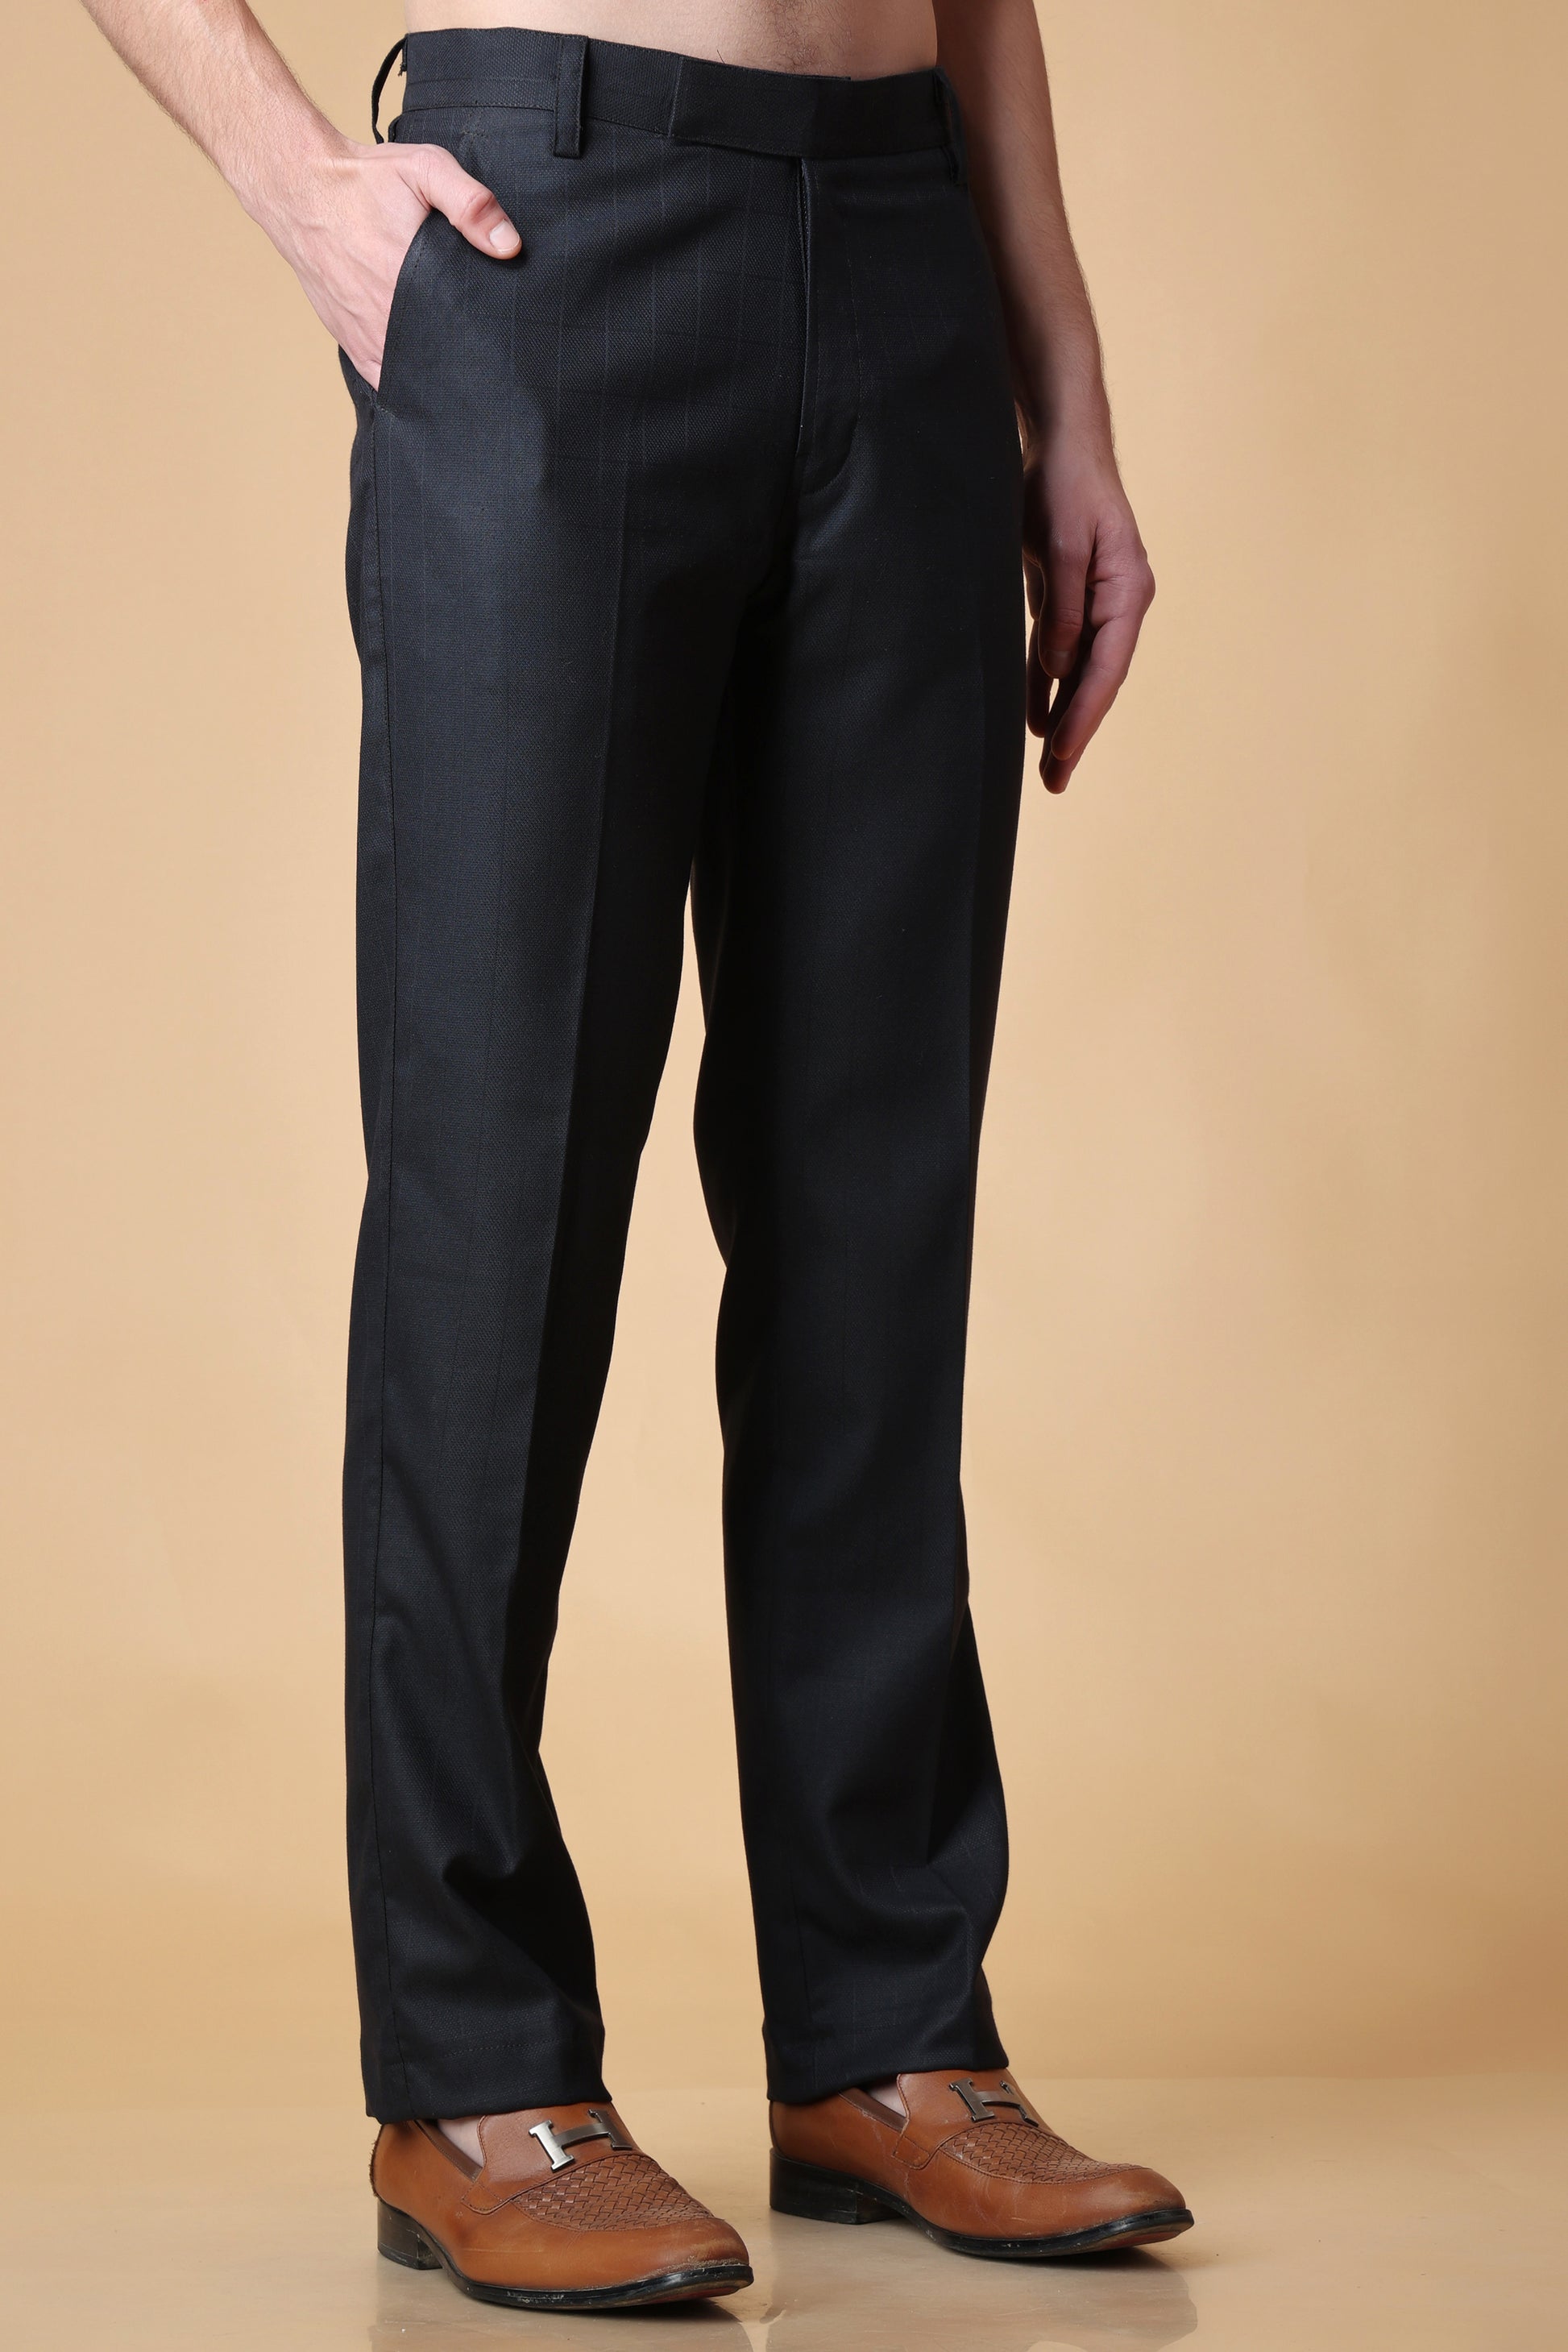 Men's Plus Size Black Checkered Formal Trousers